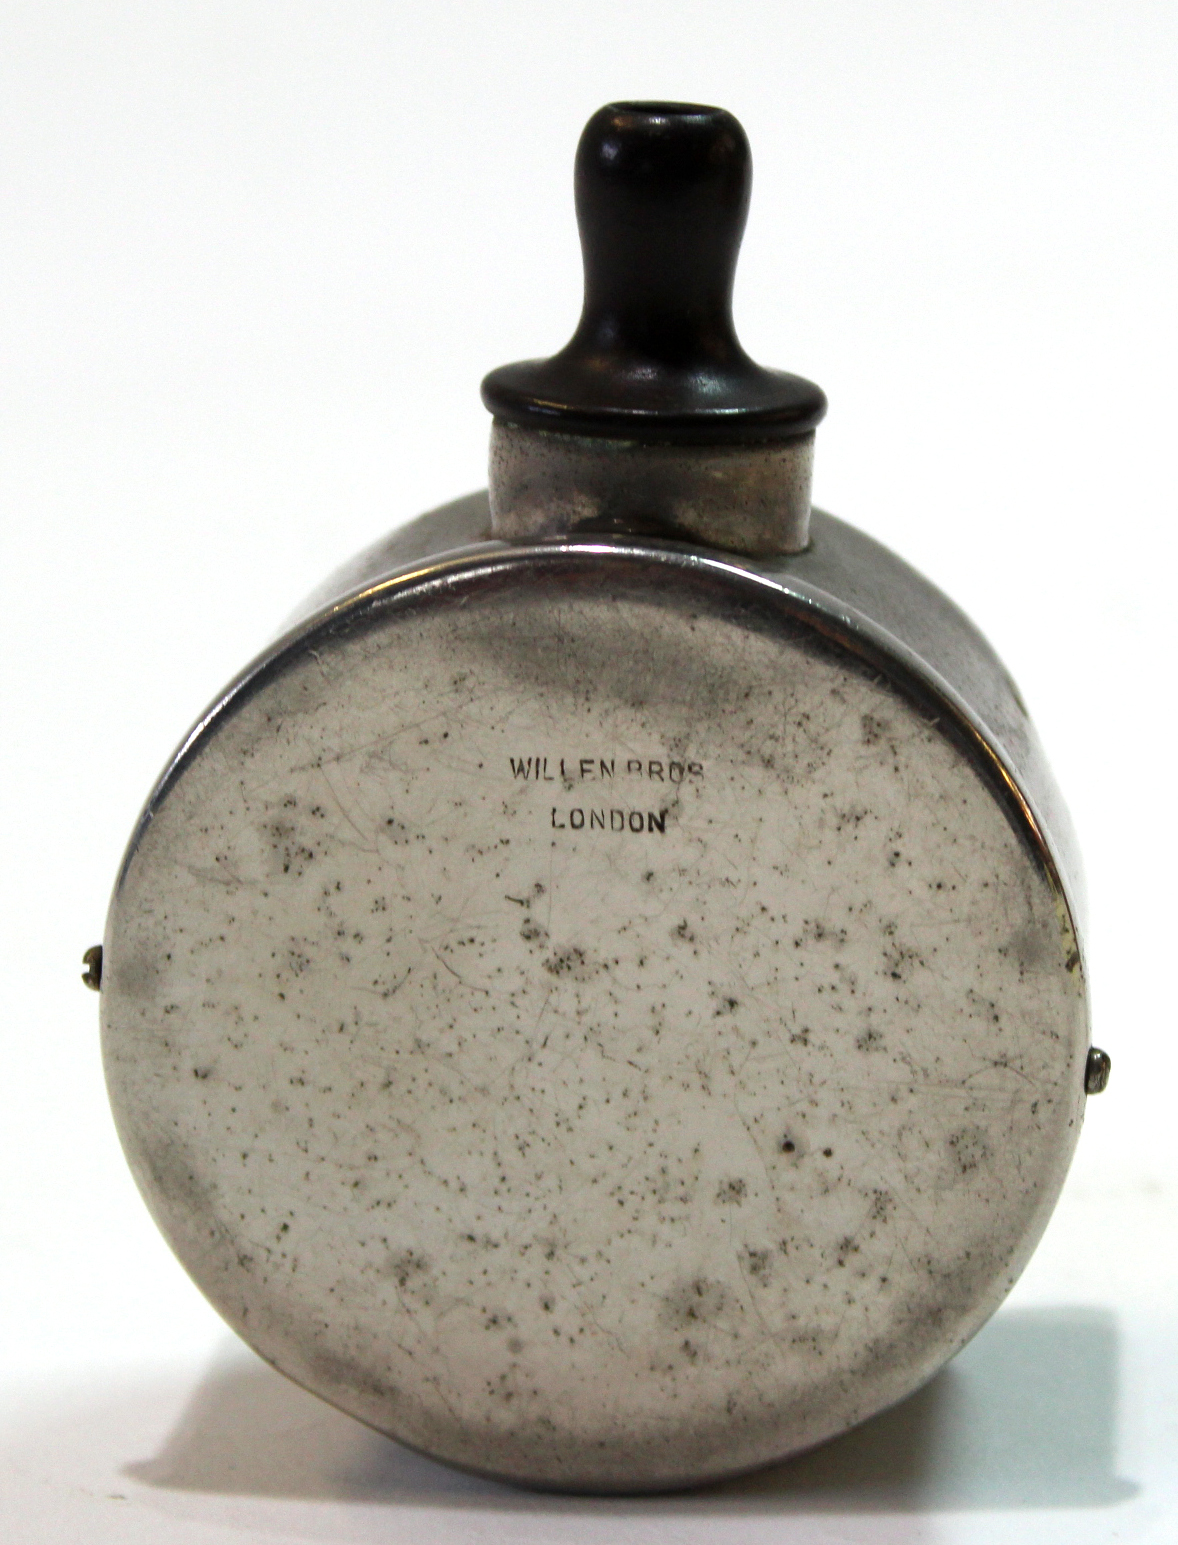 Watch tool manufactured by Willen Bros, London